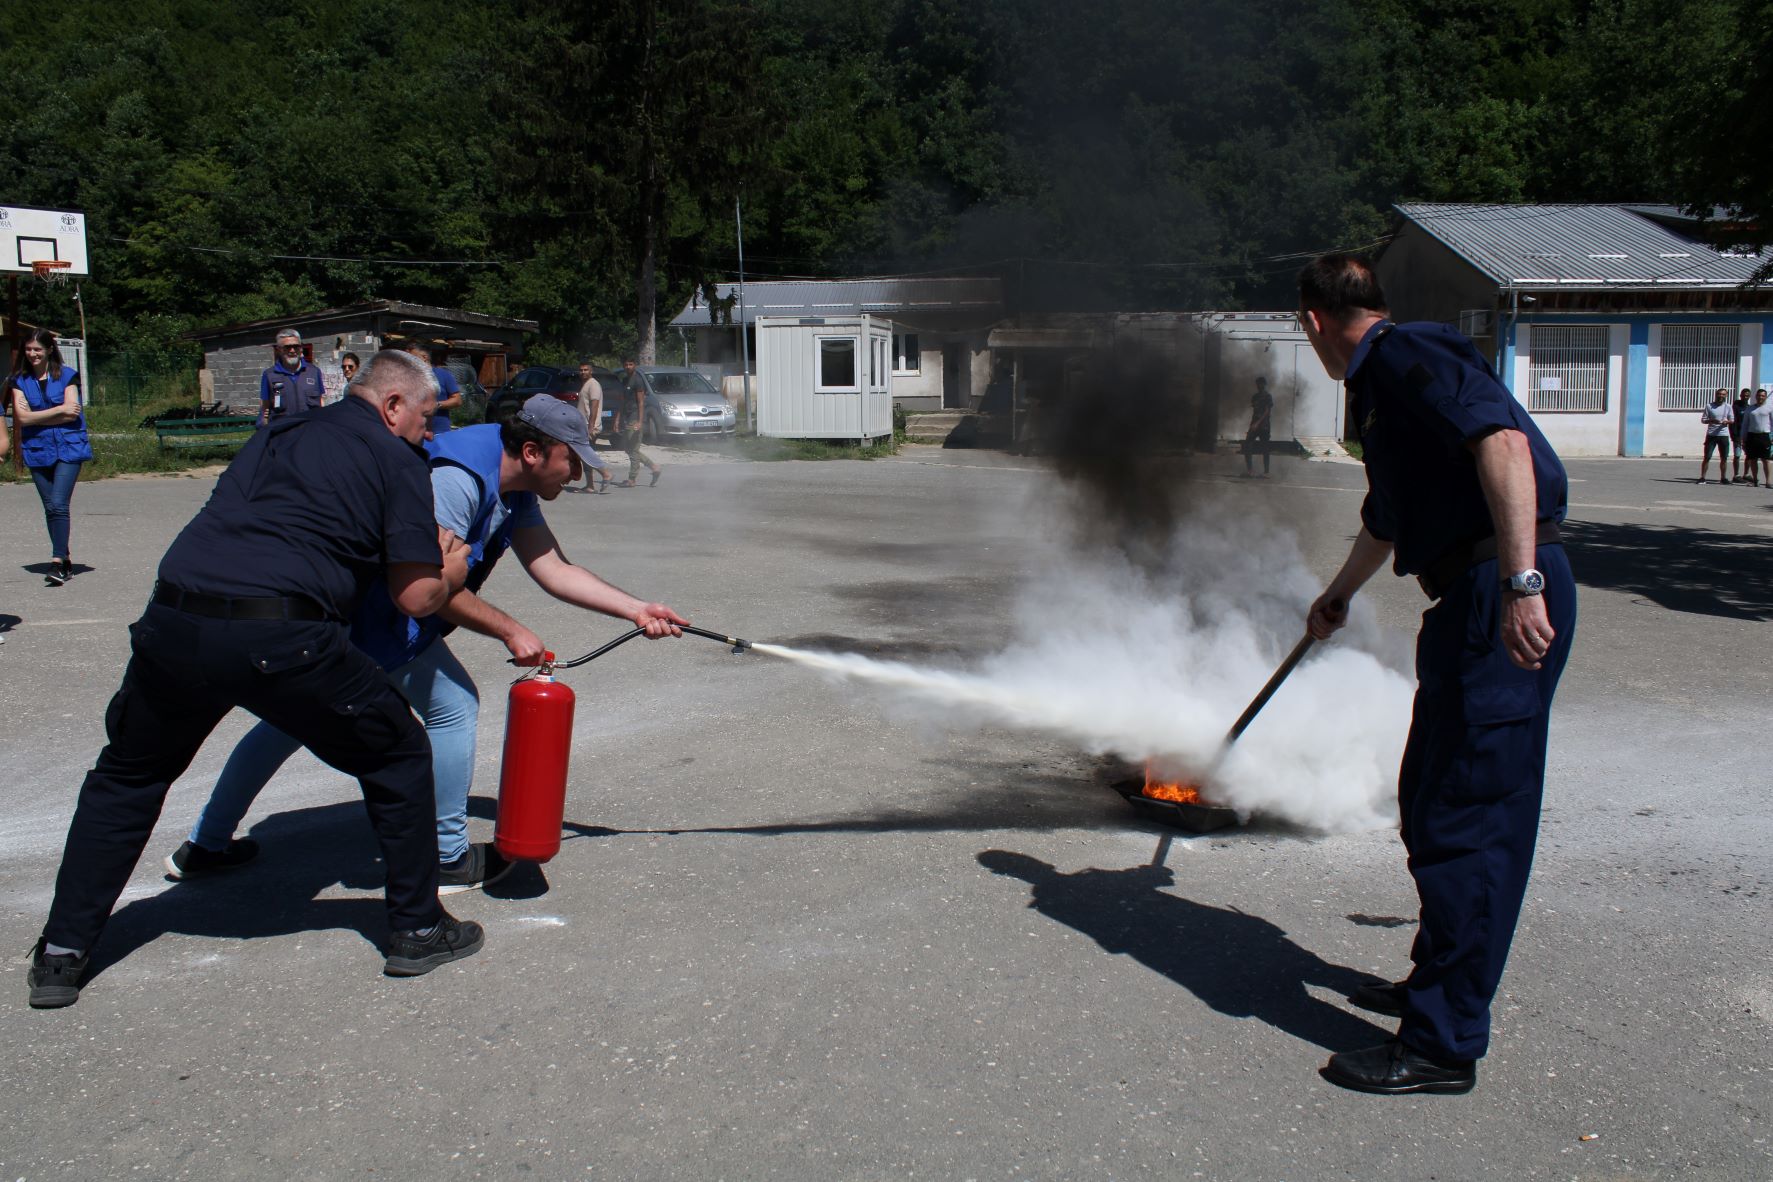 Demonstration of firefighting techniques in one of the temporary reception centres